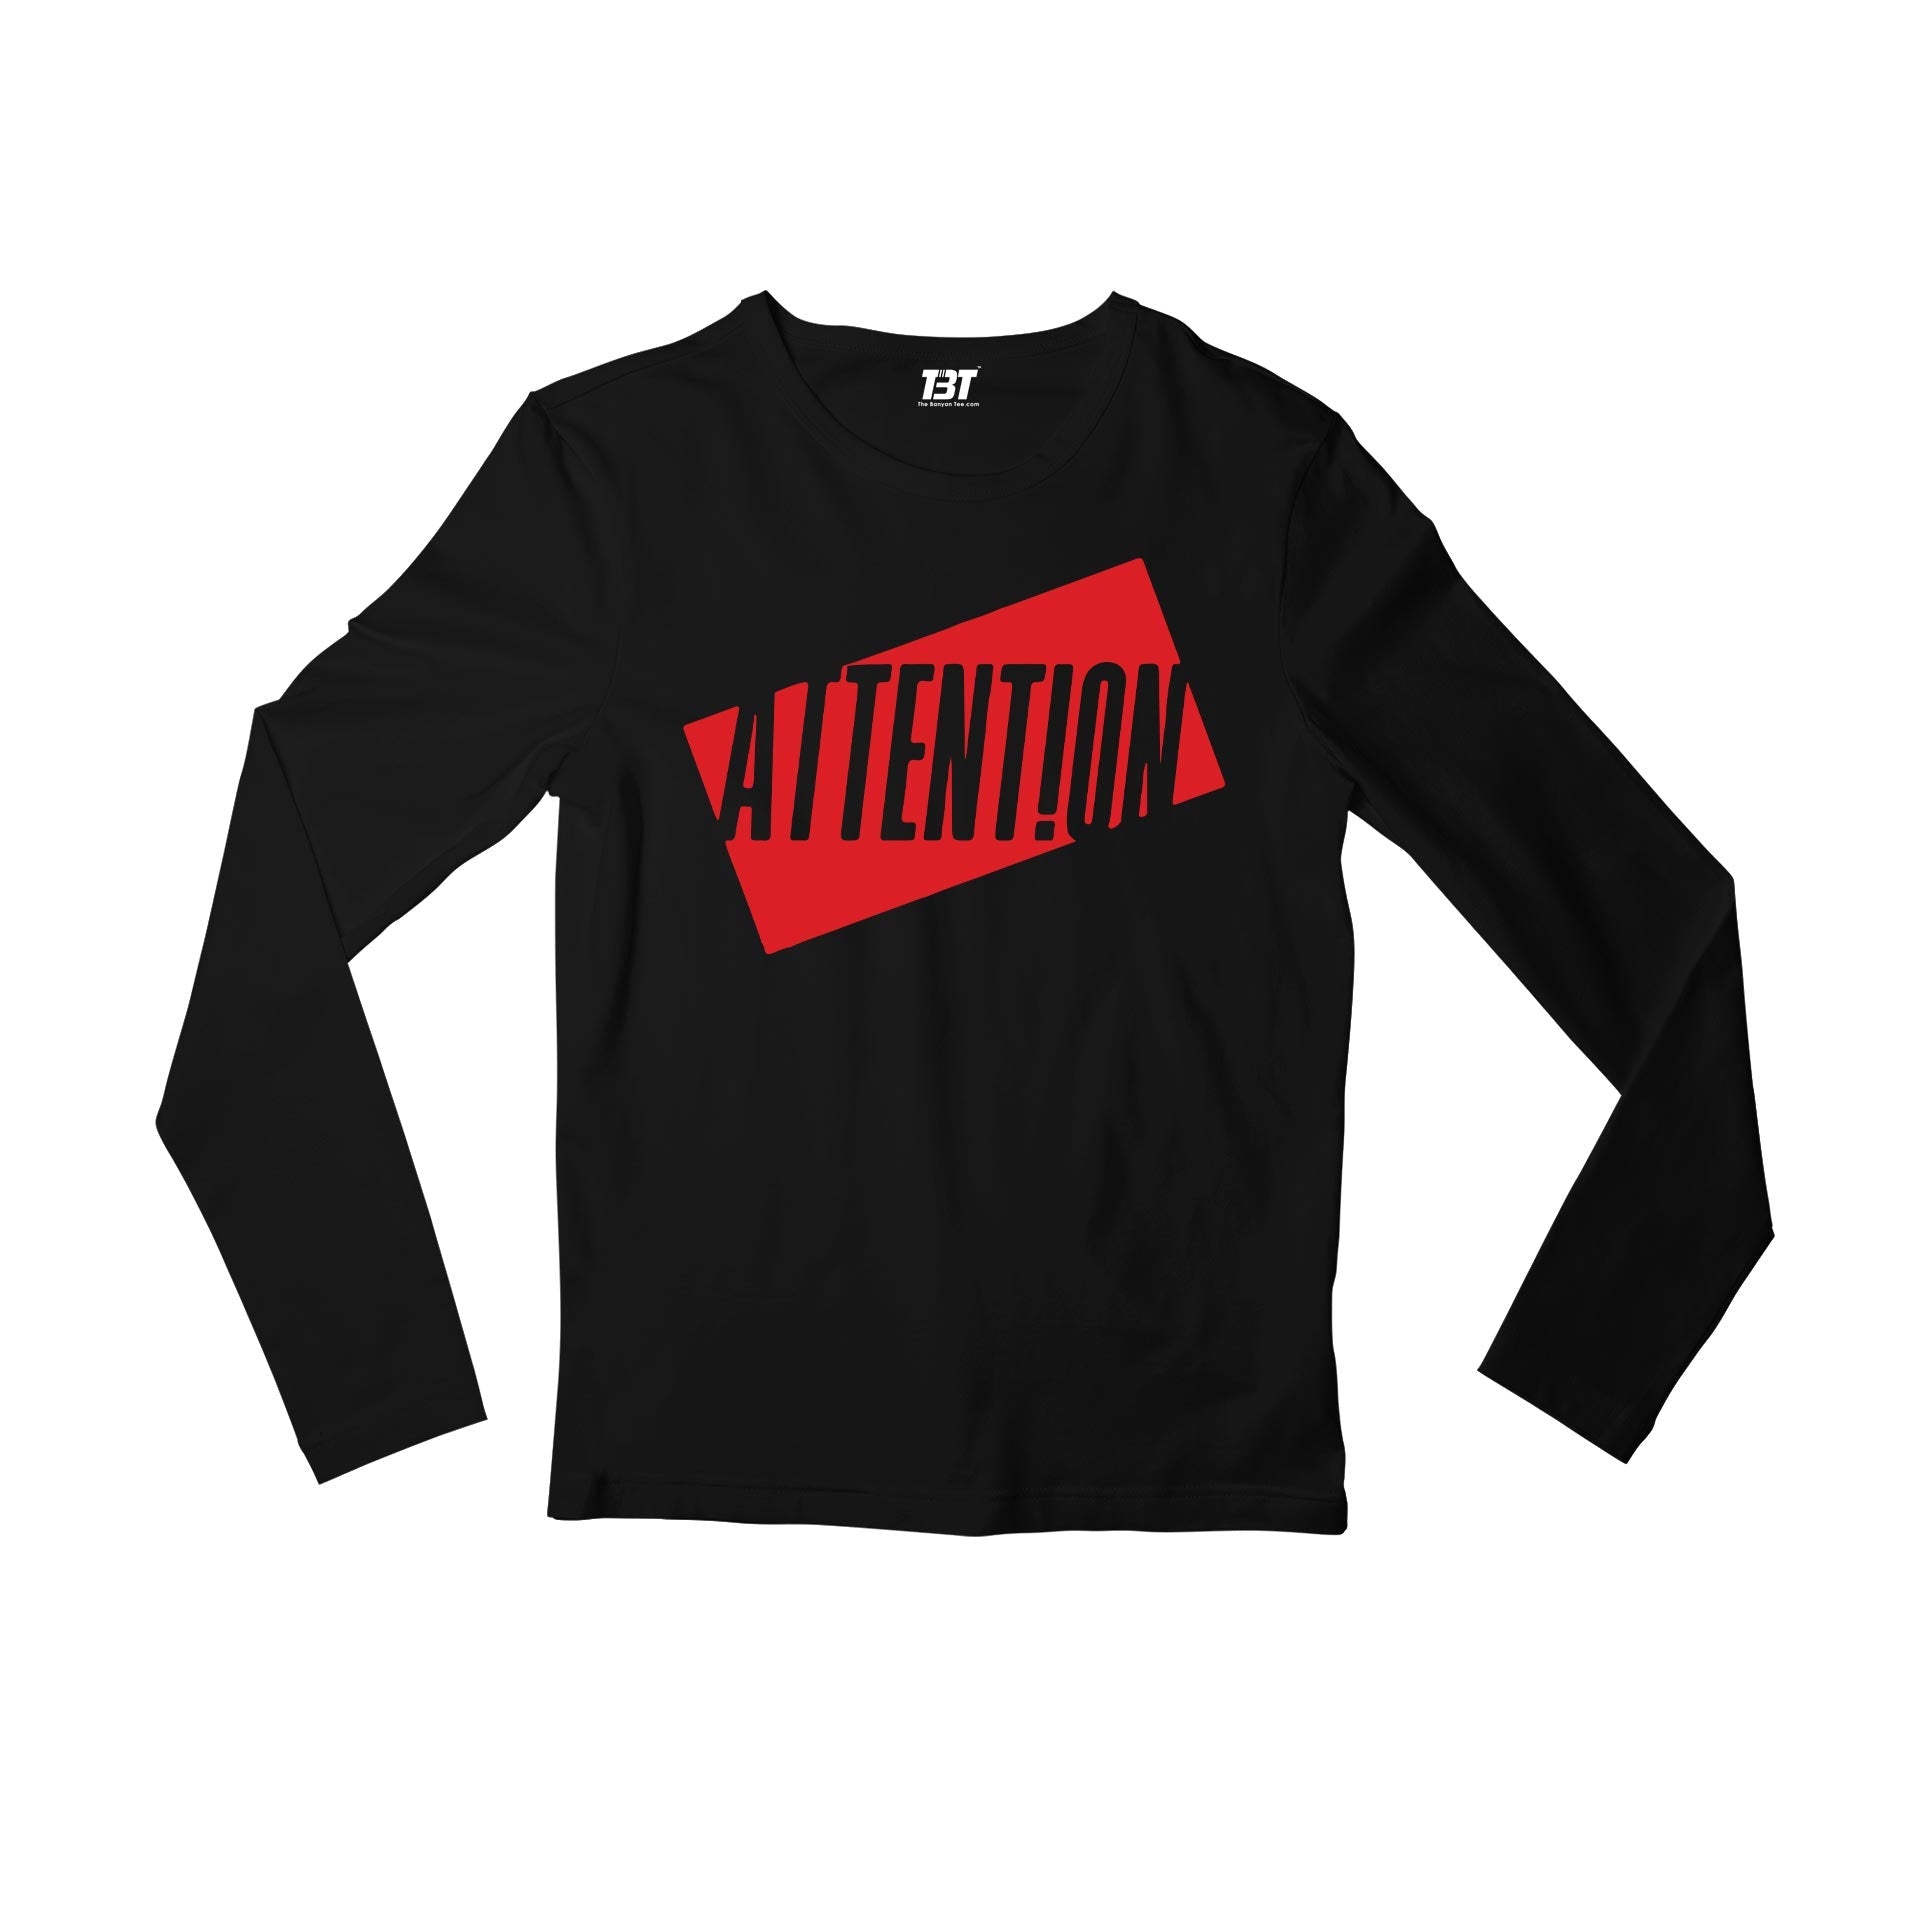 charlie puth attention full sleeves long sleeves music band buy online india the banyan tee tbt men women girls boys unisex black